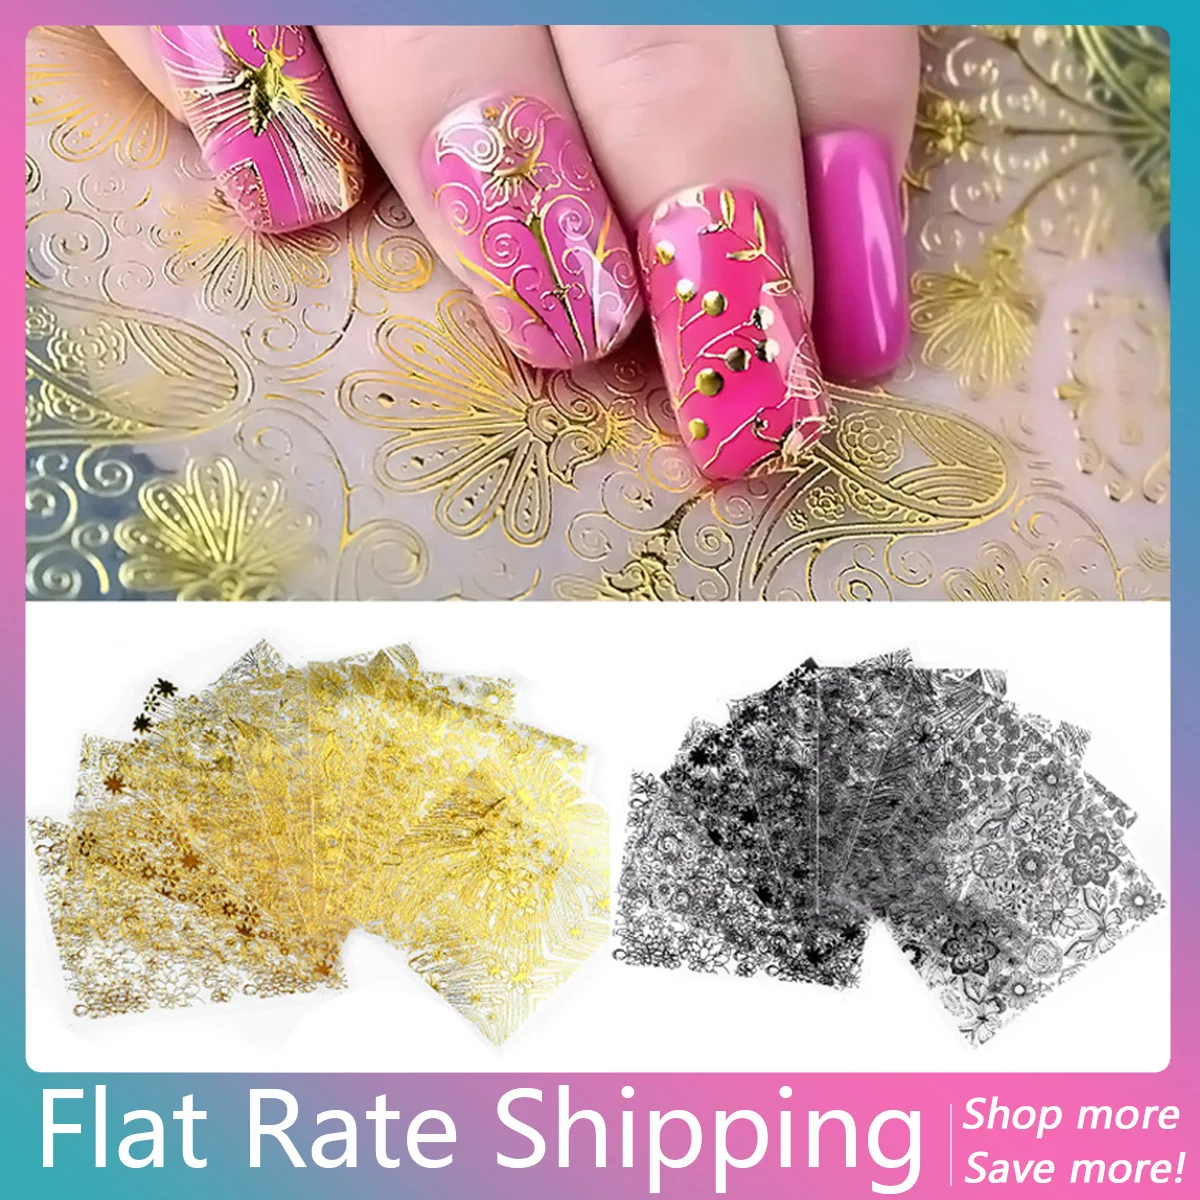 Flat Rate Shipping 8 Pcs/pack Embossed 3D Metallic Nail Stickers Gold Silver White Black Adhesive Nail Art Decoration Tool